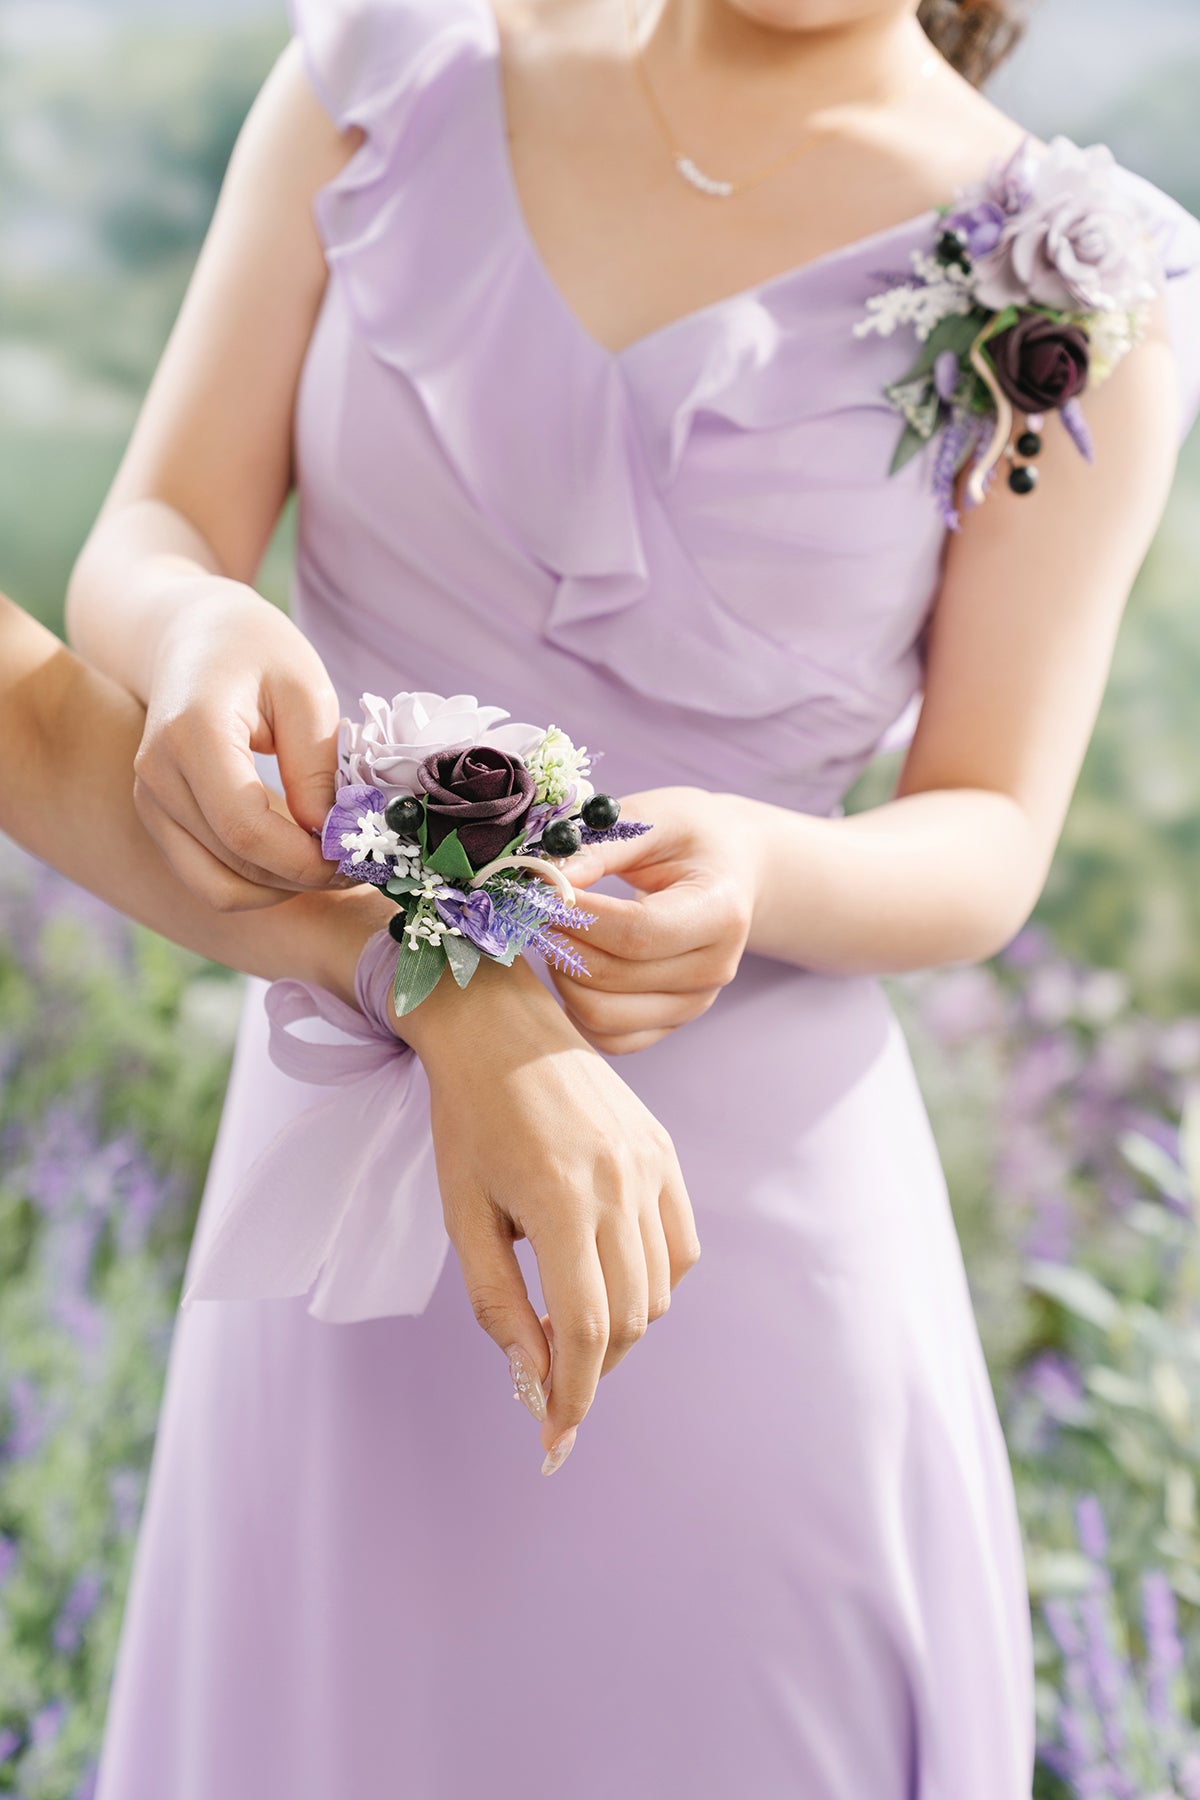 Wrist and Shoulder Corsages in French Lavender & Plum